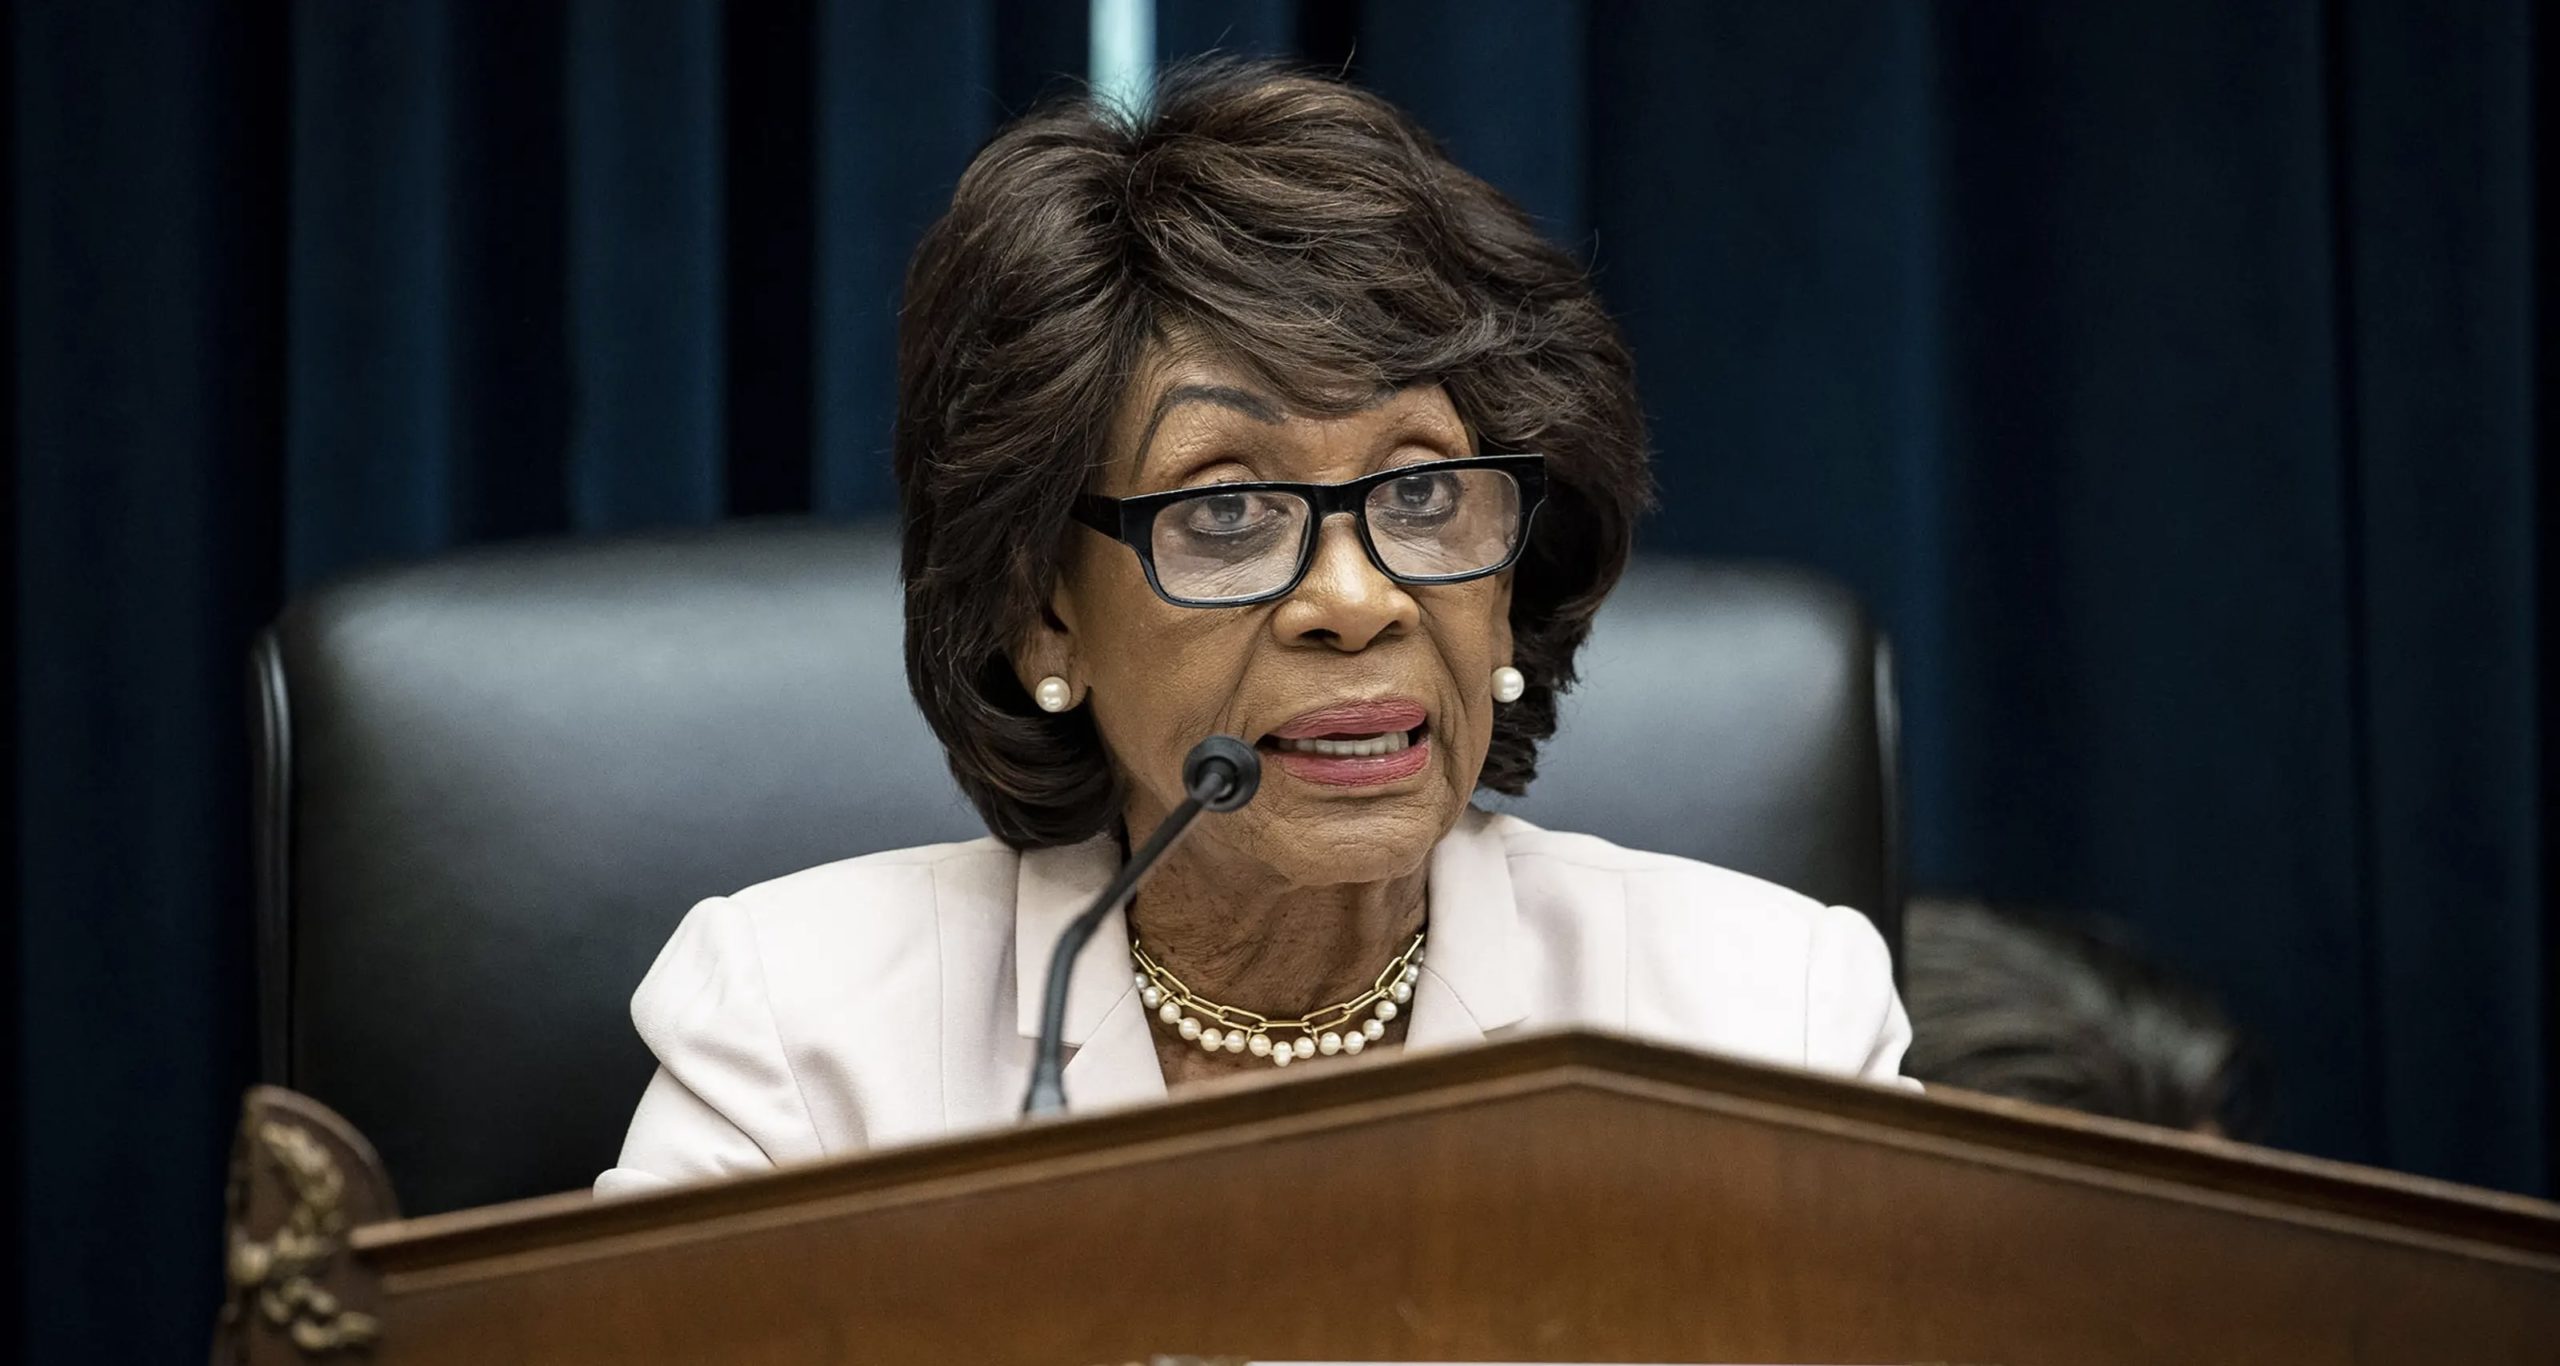 Houston Man Arrested After Making Death Threats to Auntie Maxine Waters